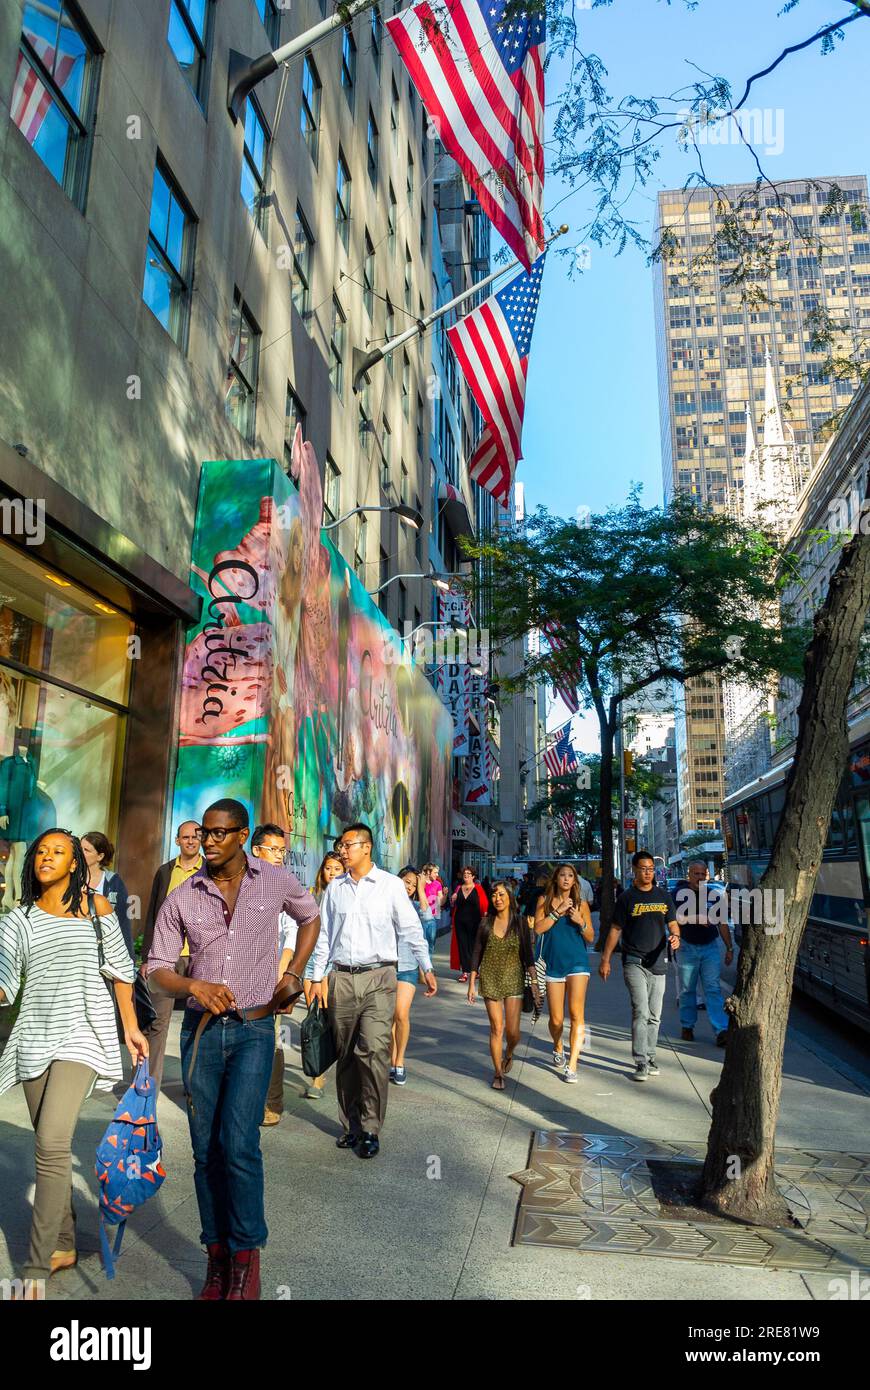 New York City, NY, USA, Street Scenes, Fifth Avenue, Diverse, Multi-Cultural Large Crowd People, Walking on Street, American Flags on Display, crowded sidewalk new yorkers buildings Stock Photo